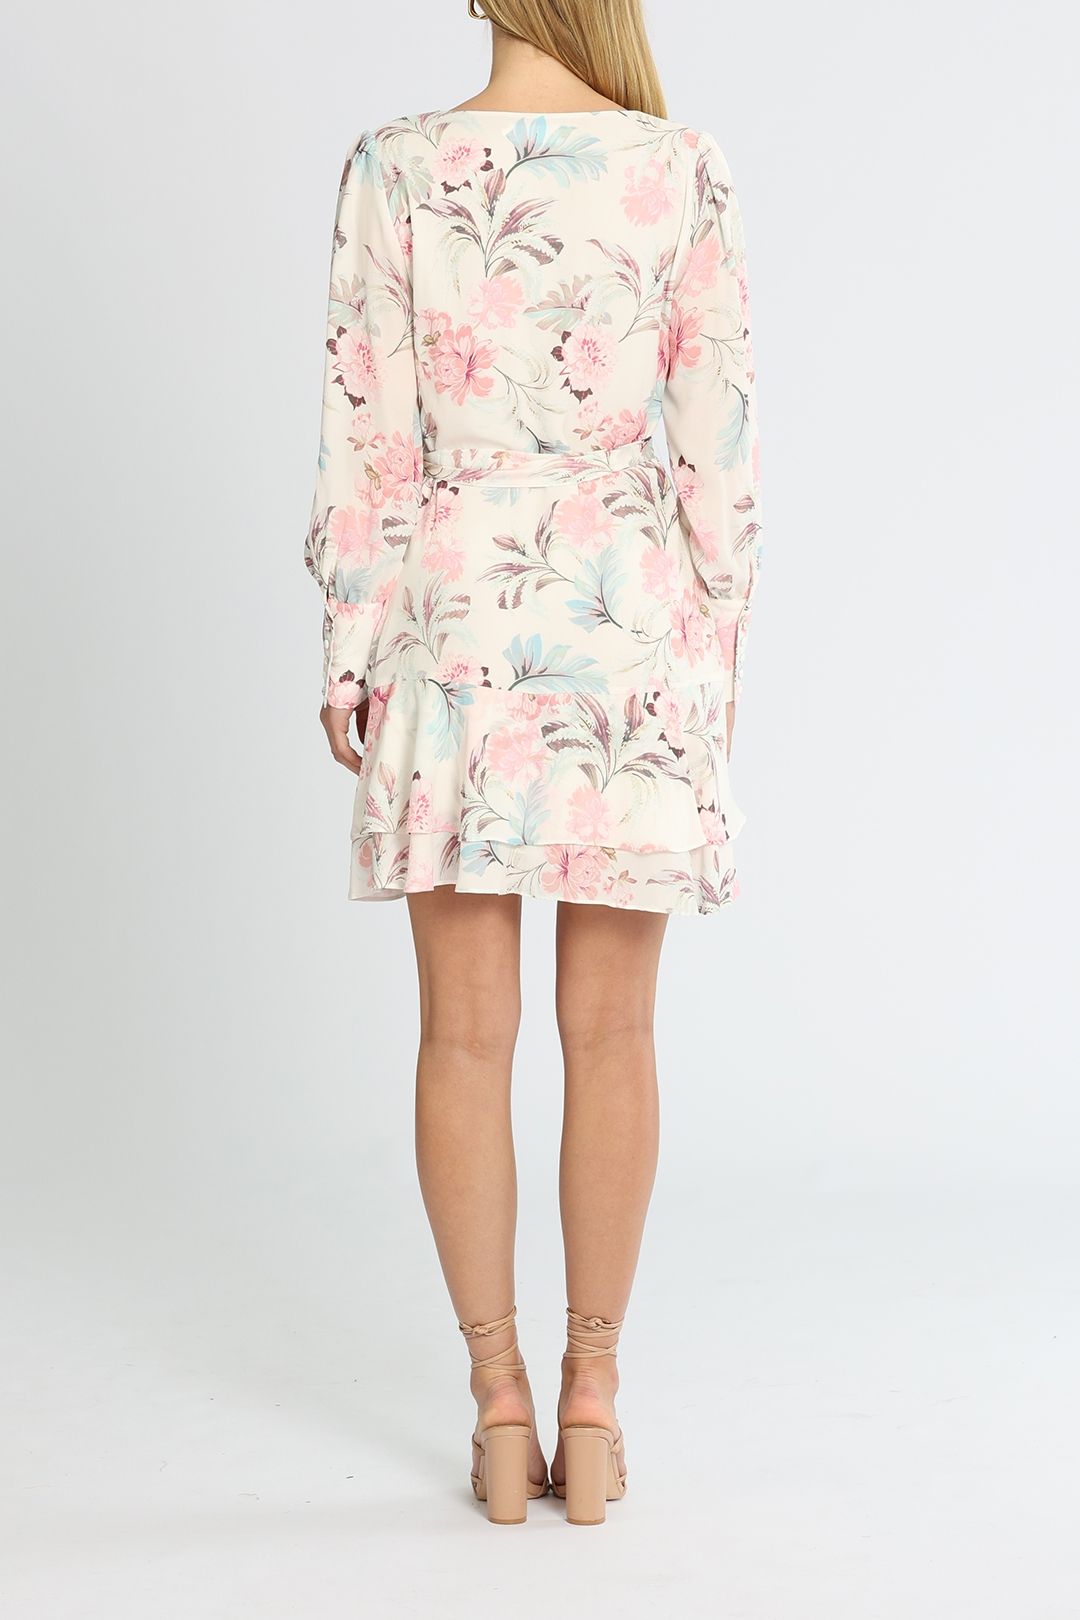 Belle and Bloom A Night With You Mini Dress Cream Floral